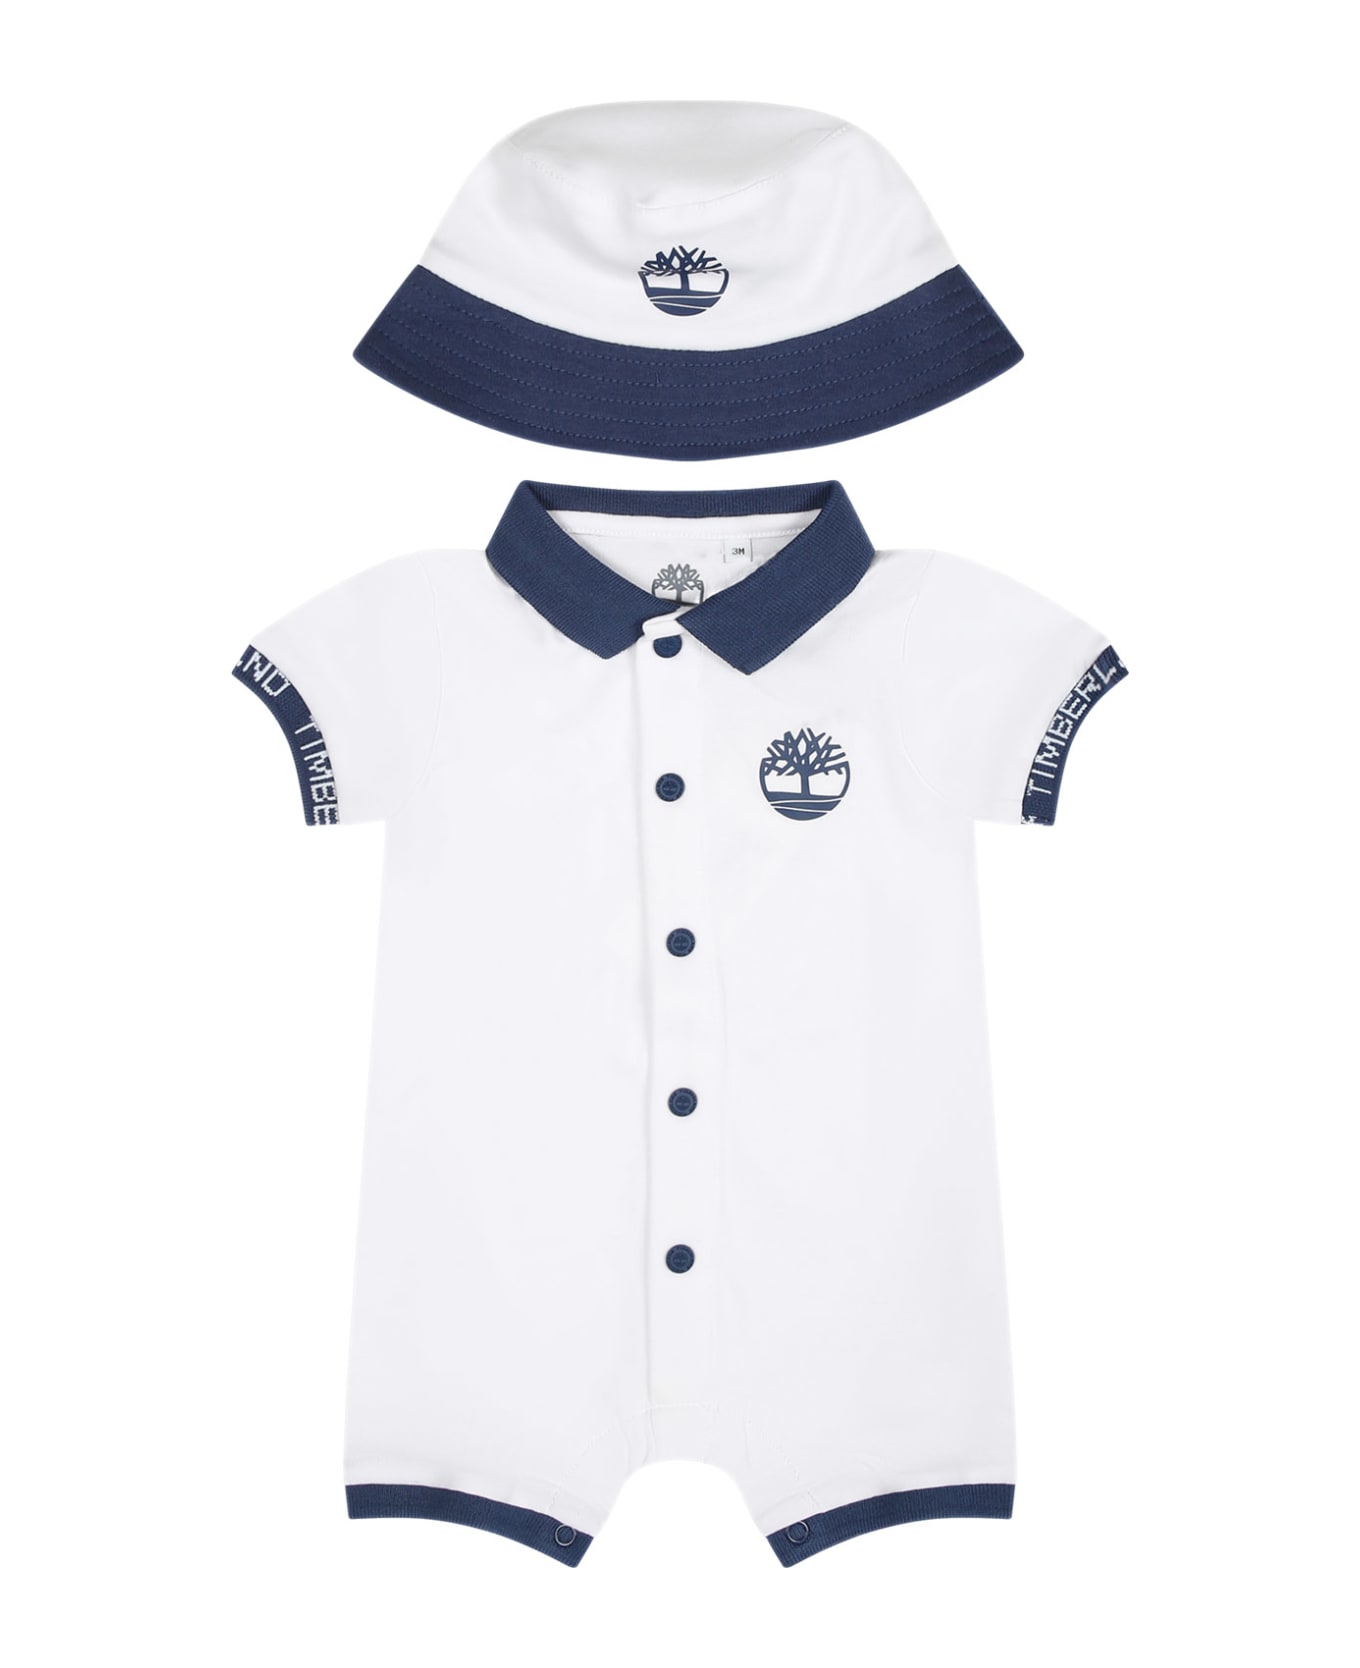 Timberland White Romper For Baby Boy With Logo - White